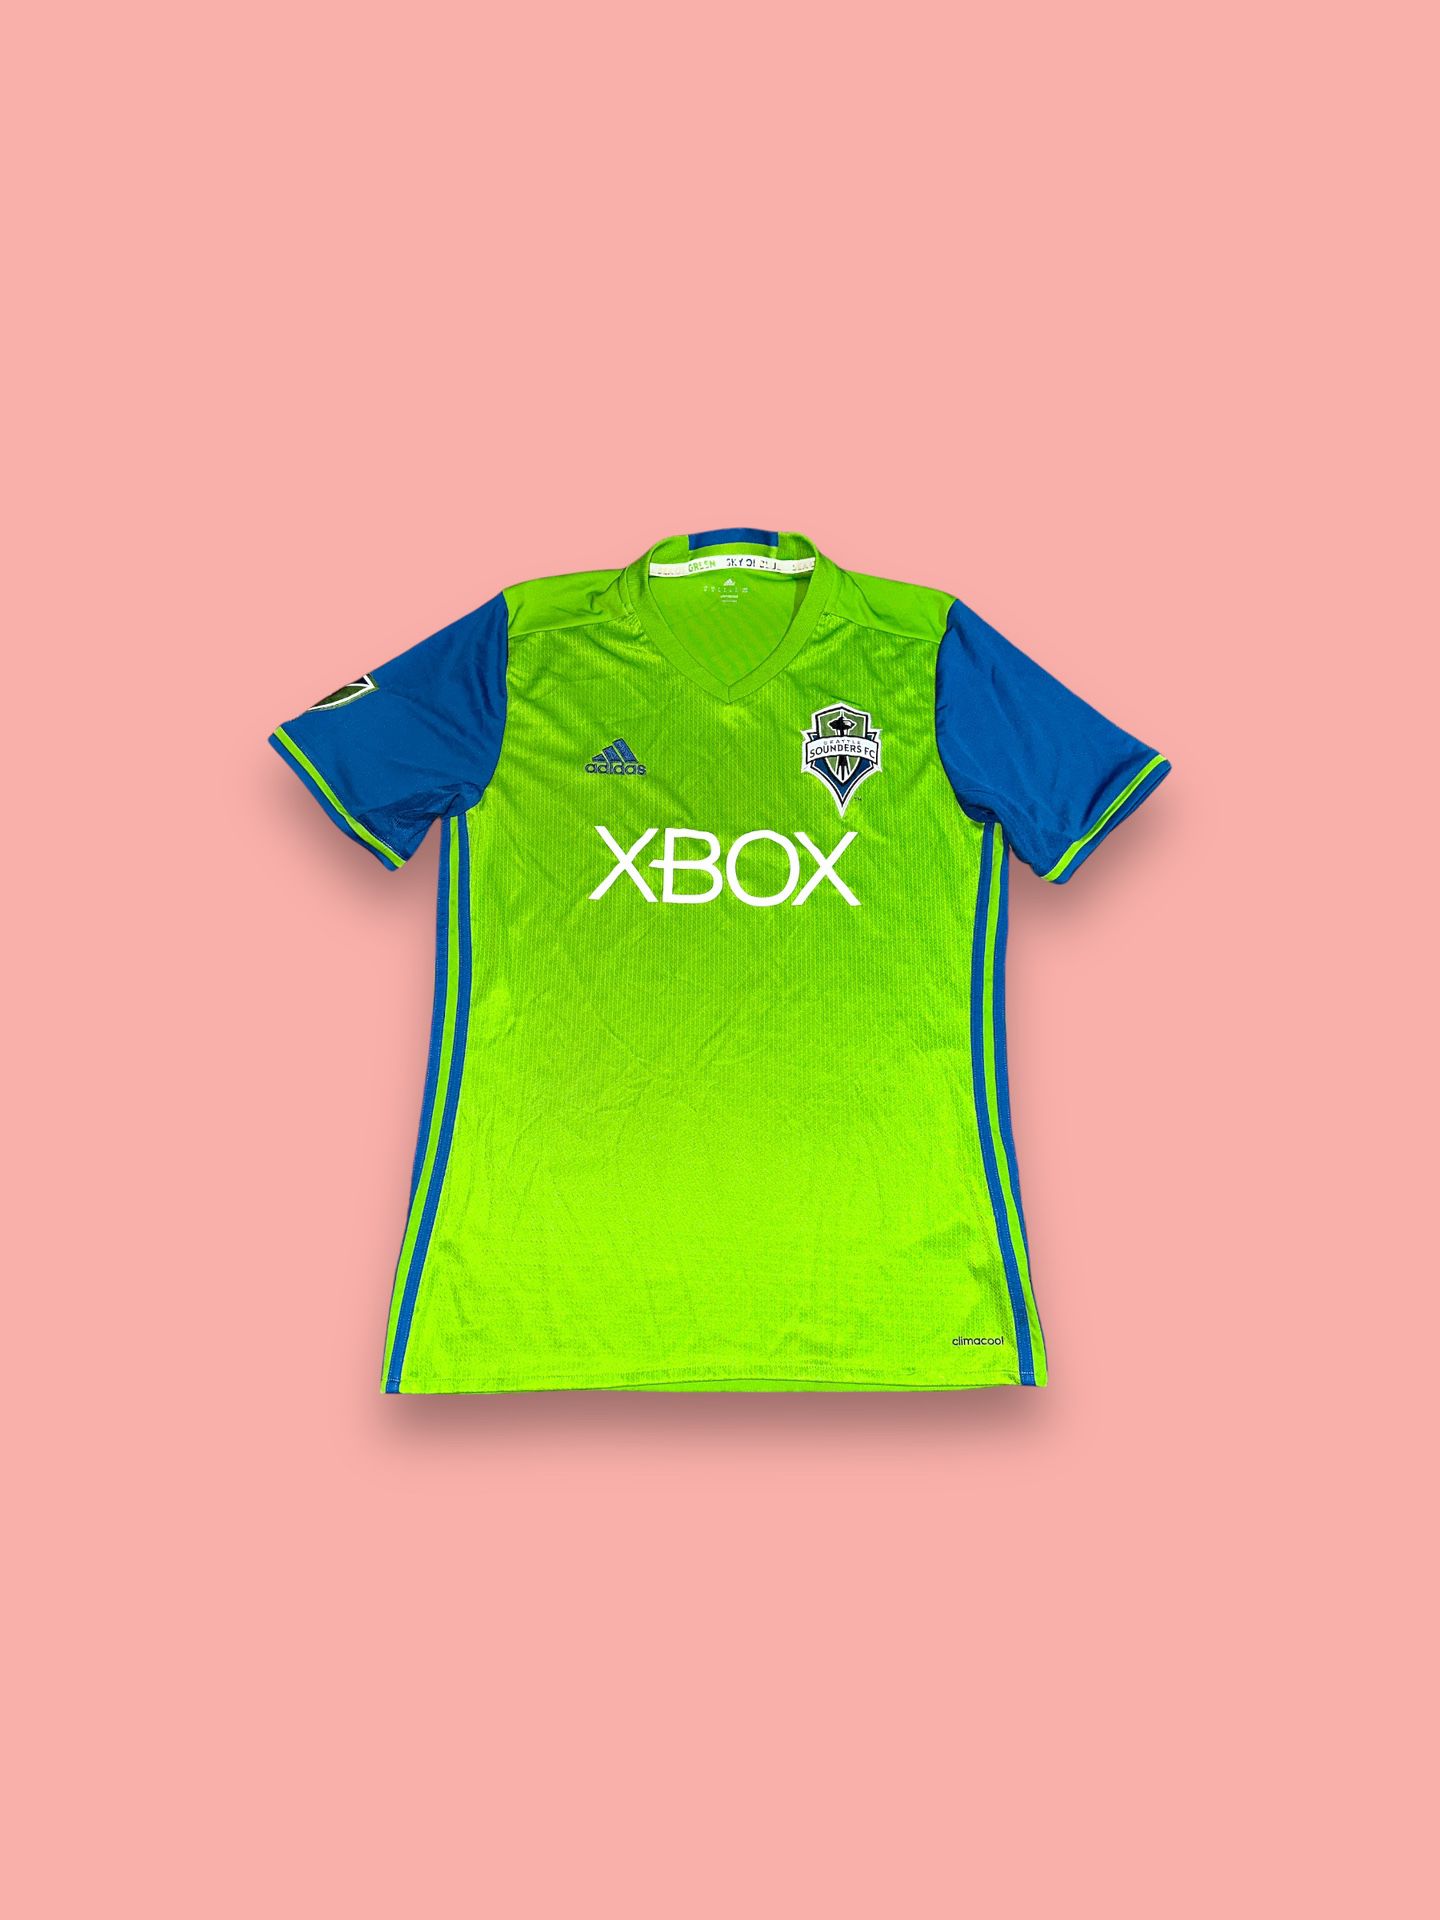 Seattle Sounders FC Xbox adidas soccer jersey 